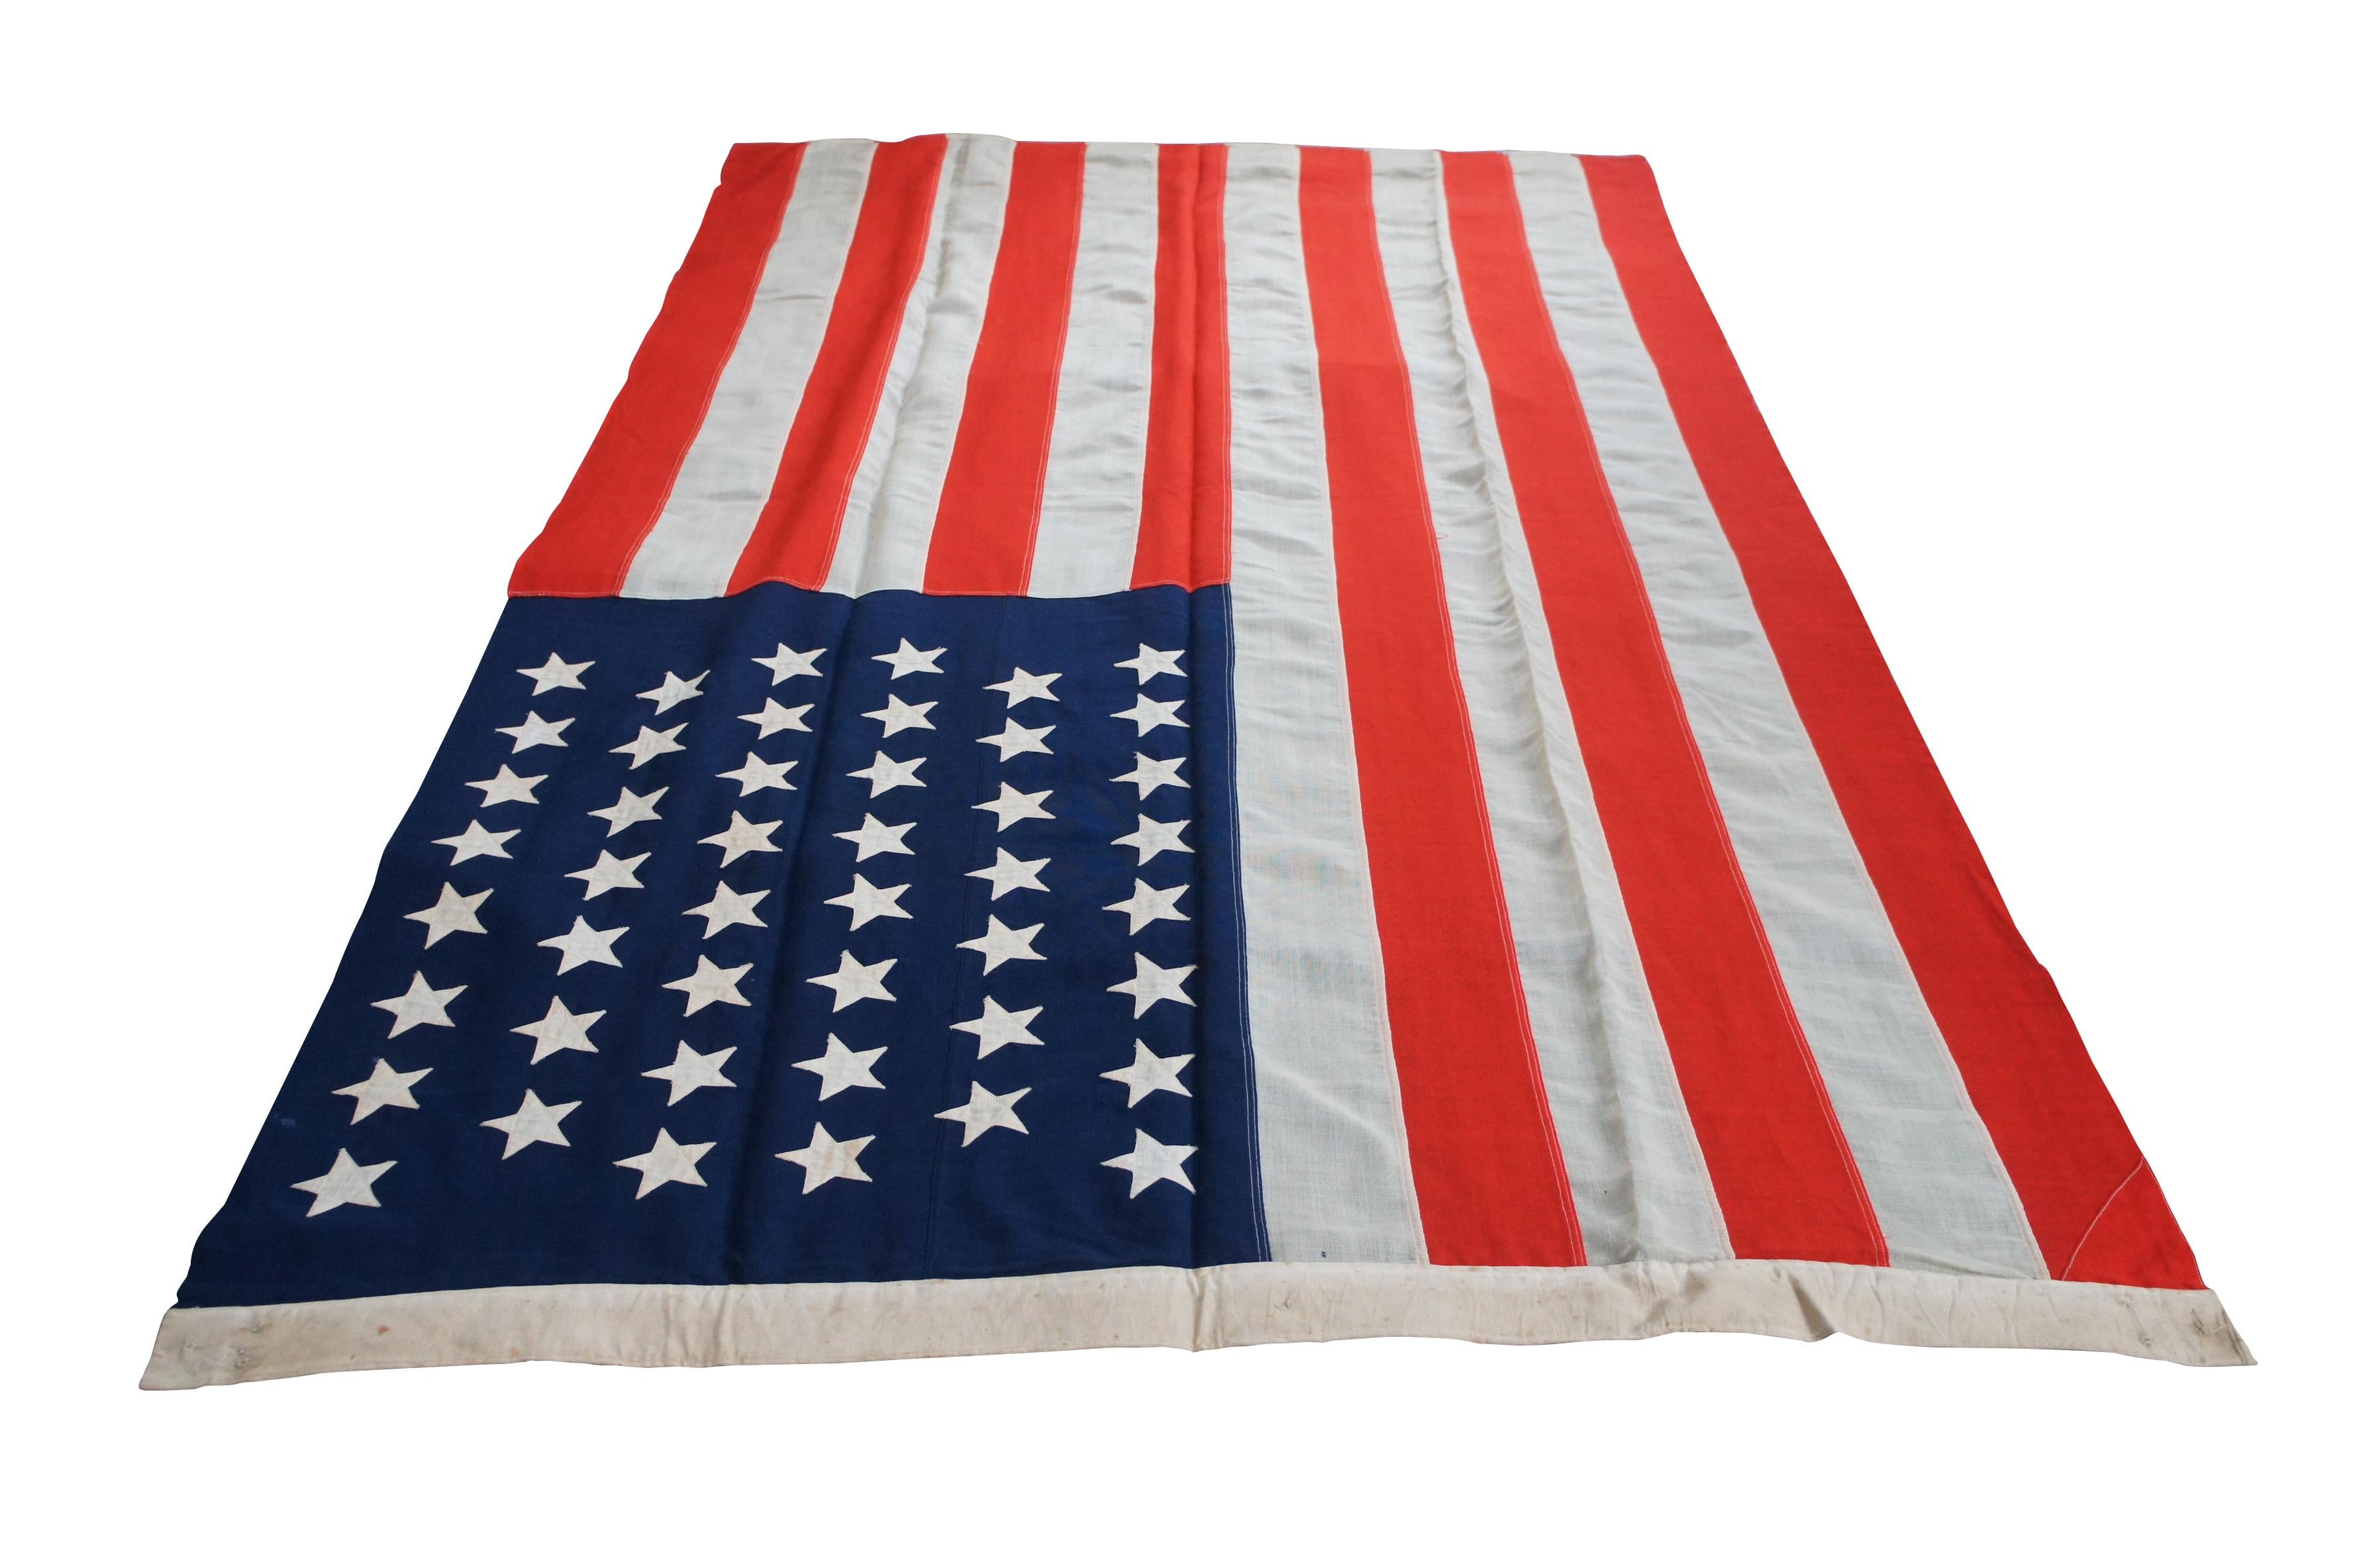 Antique forty six star large wool American flag by Horstmann Company, circa 1908-1912.

Horstmann firm was founded by William H. Horstmann (1785-1850), who had immigrated to Philadelphia from Germany. Horstmann bought out a local swordmaker in 1828